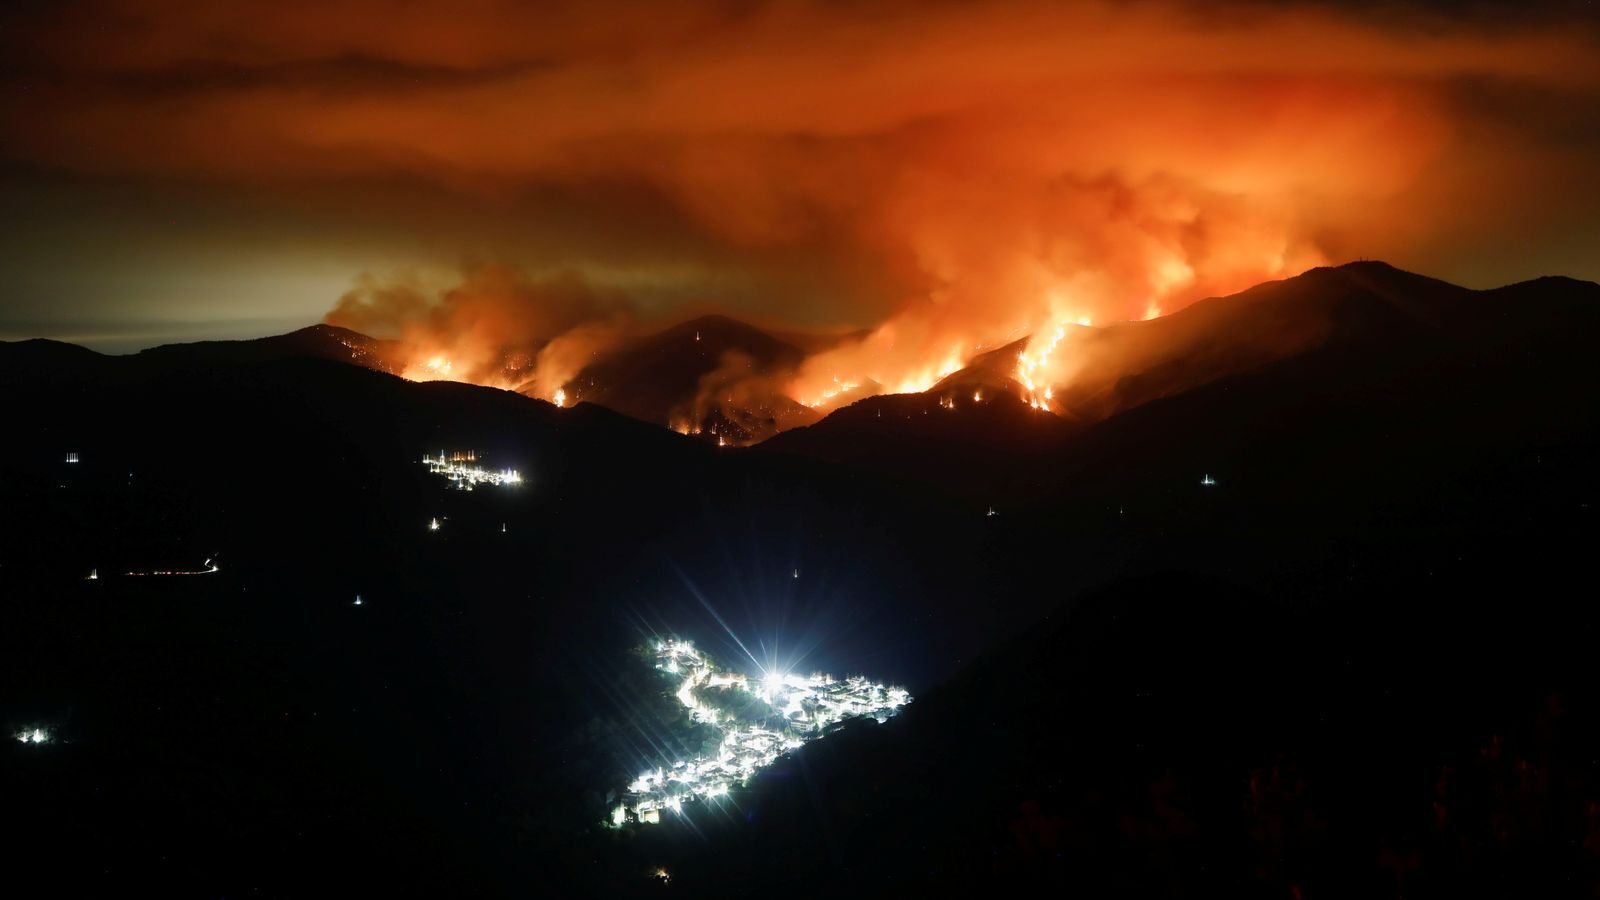 The wildfire has been raging since Wednesday